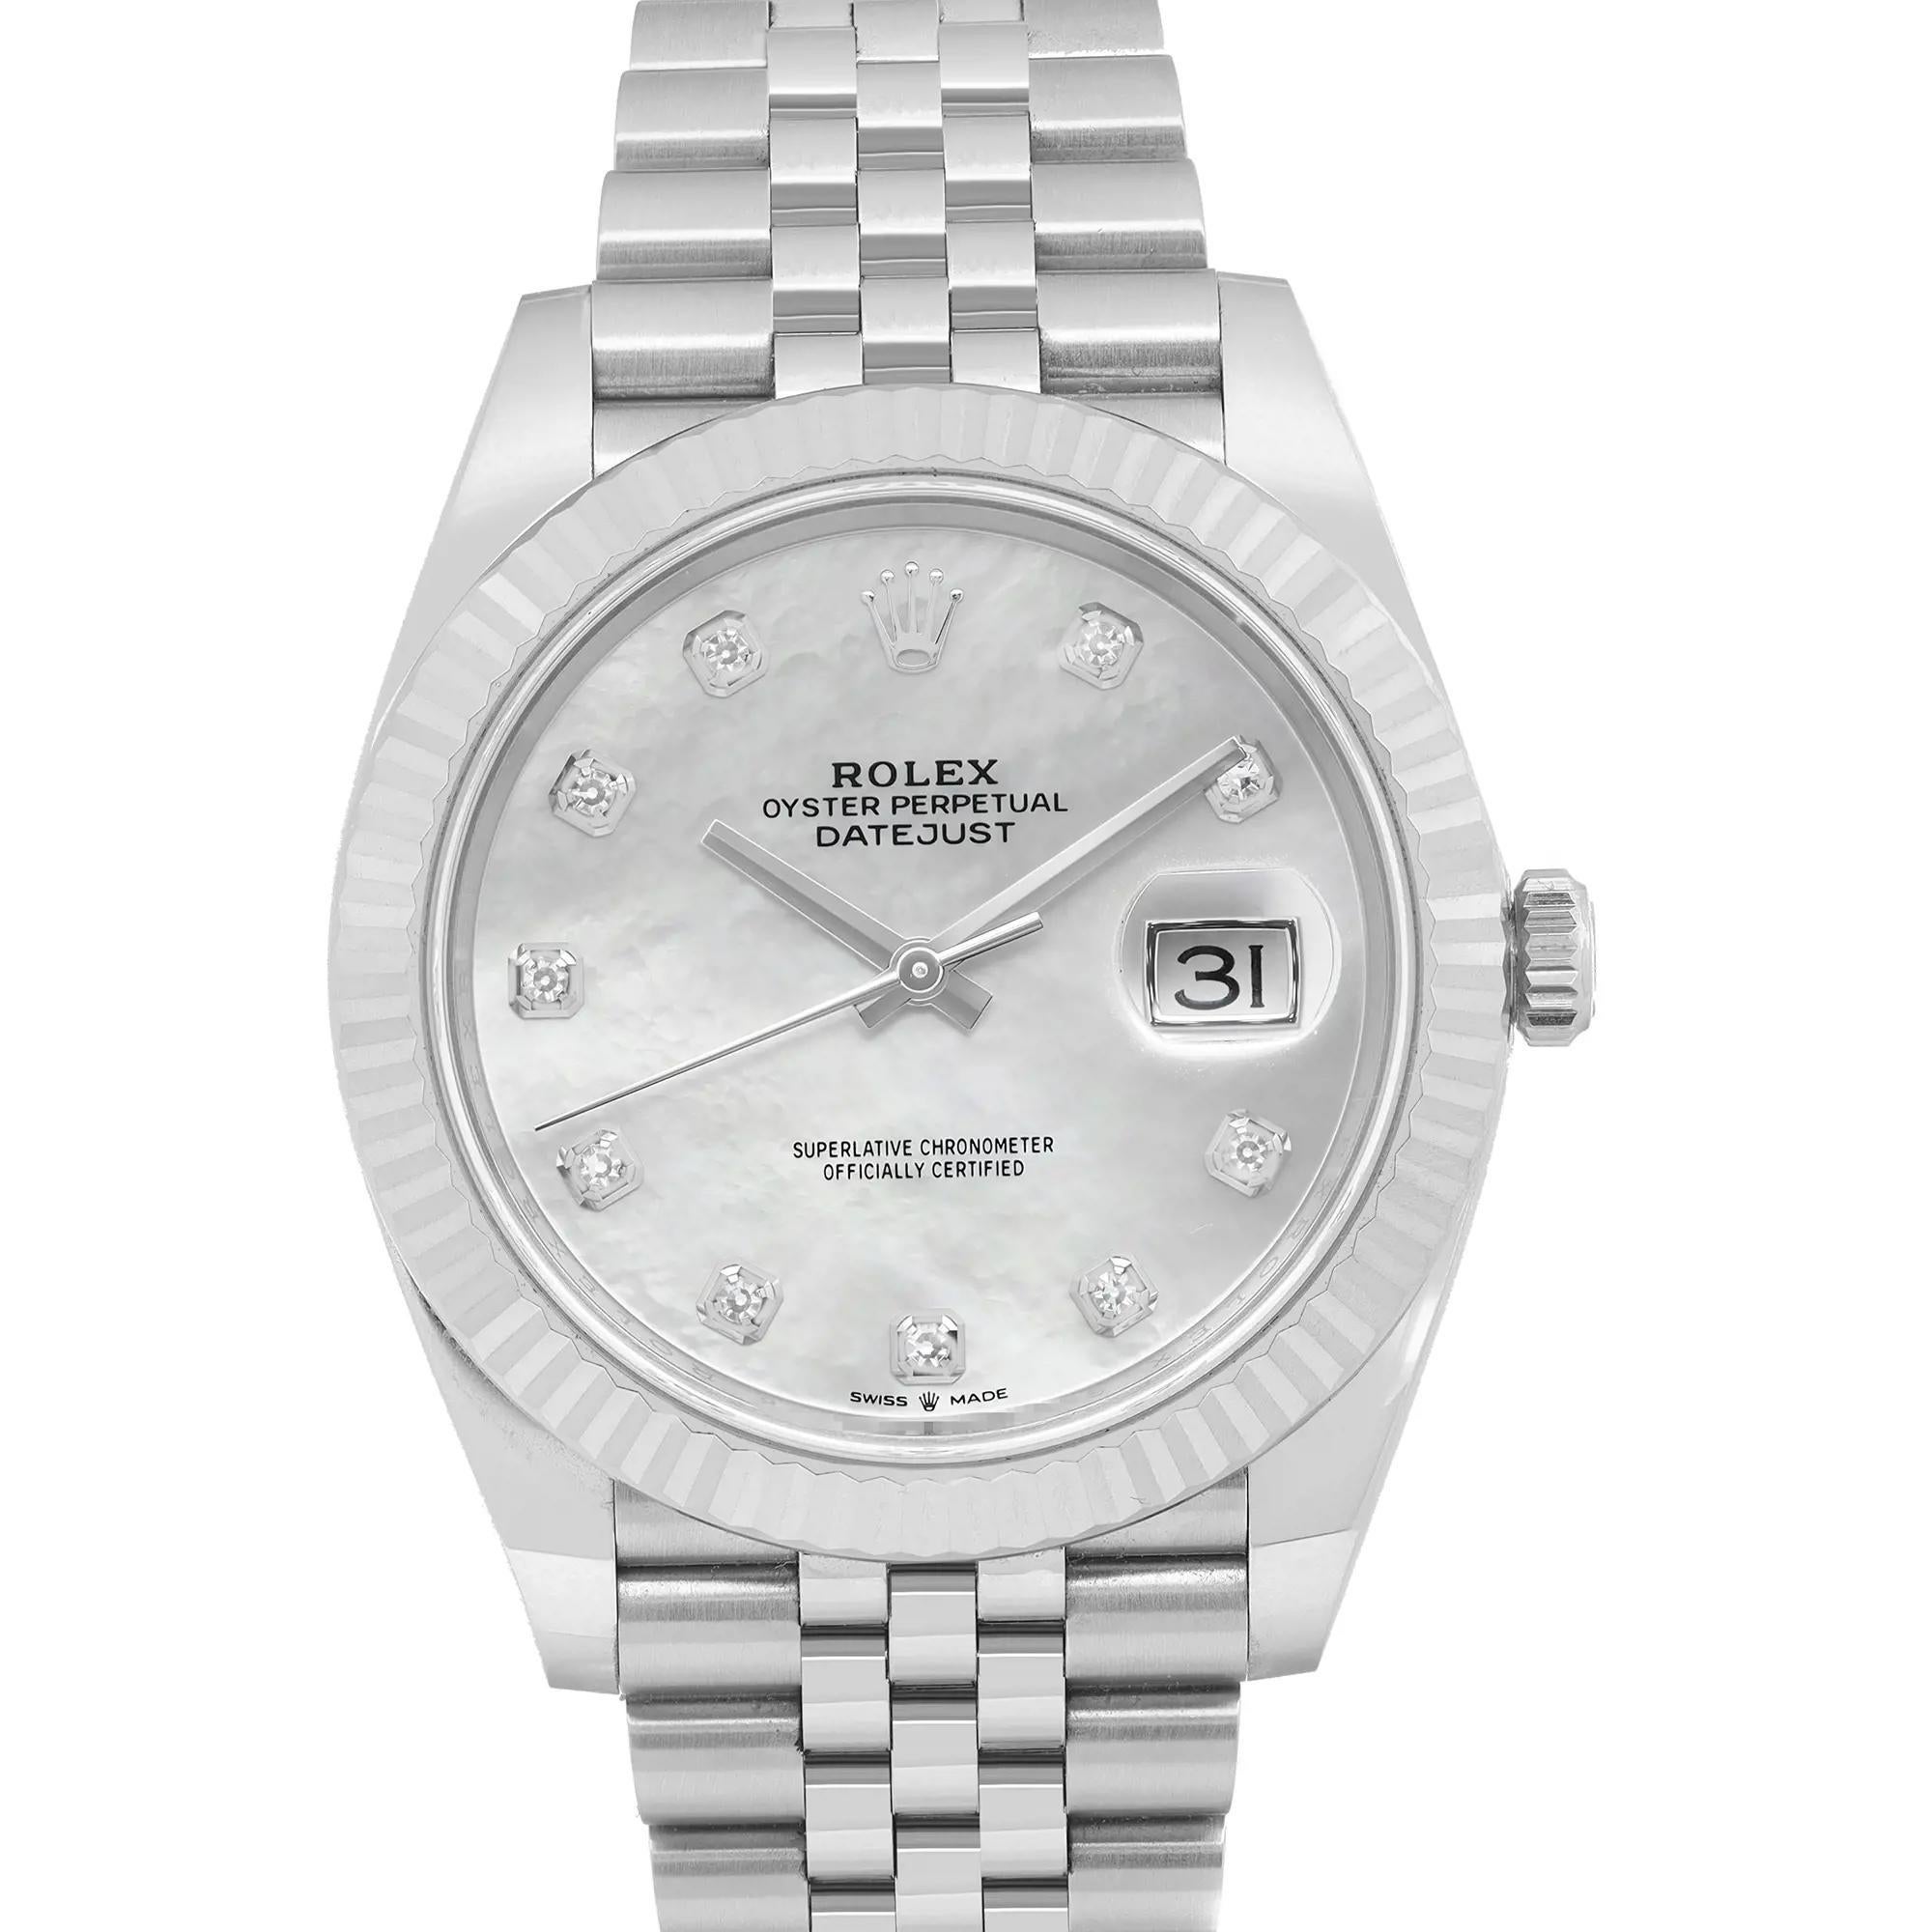 Brand new. Box and papers included. 18K White Gold Bezel and steel case and bracelet. Very beautiful watch.


Brand and Model Information:
Brand: Rolex
Model: Rolex Datejust 126334
Model Number: 126334

Type and Style:
Type: Wristwatch
Style: